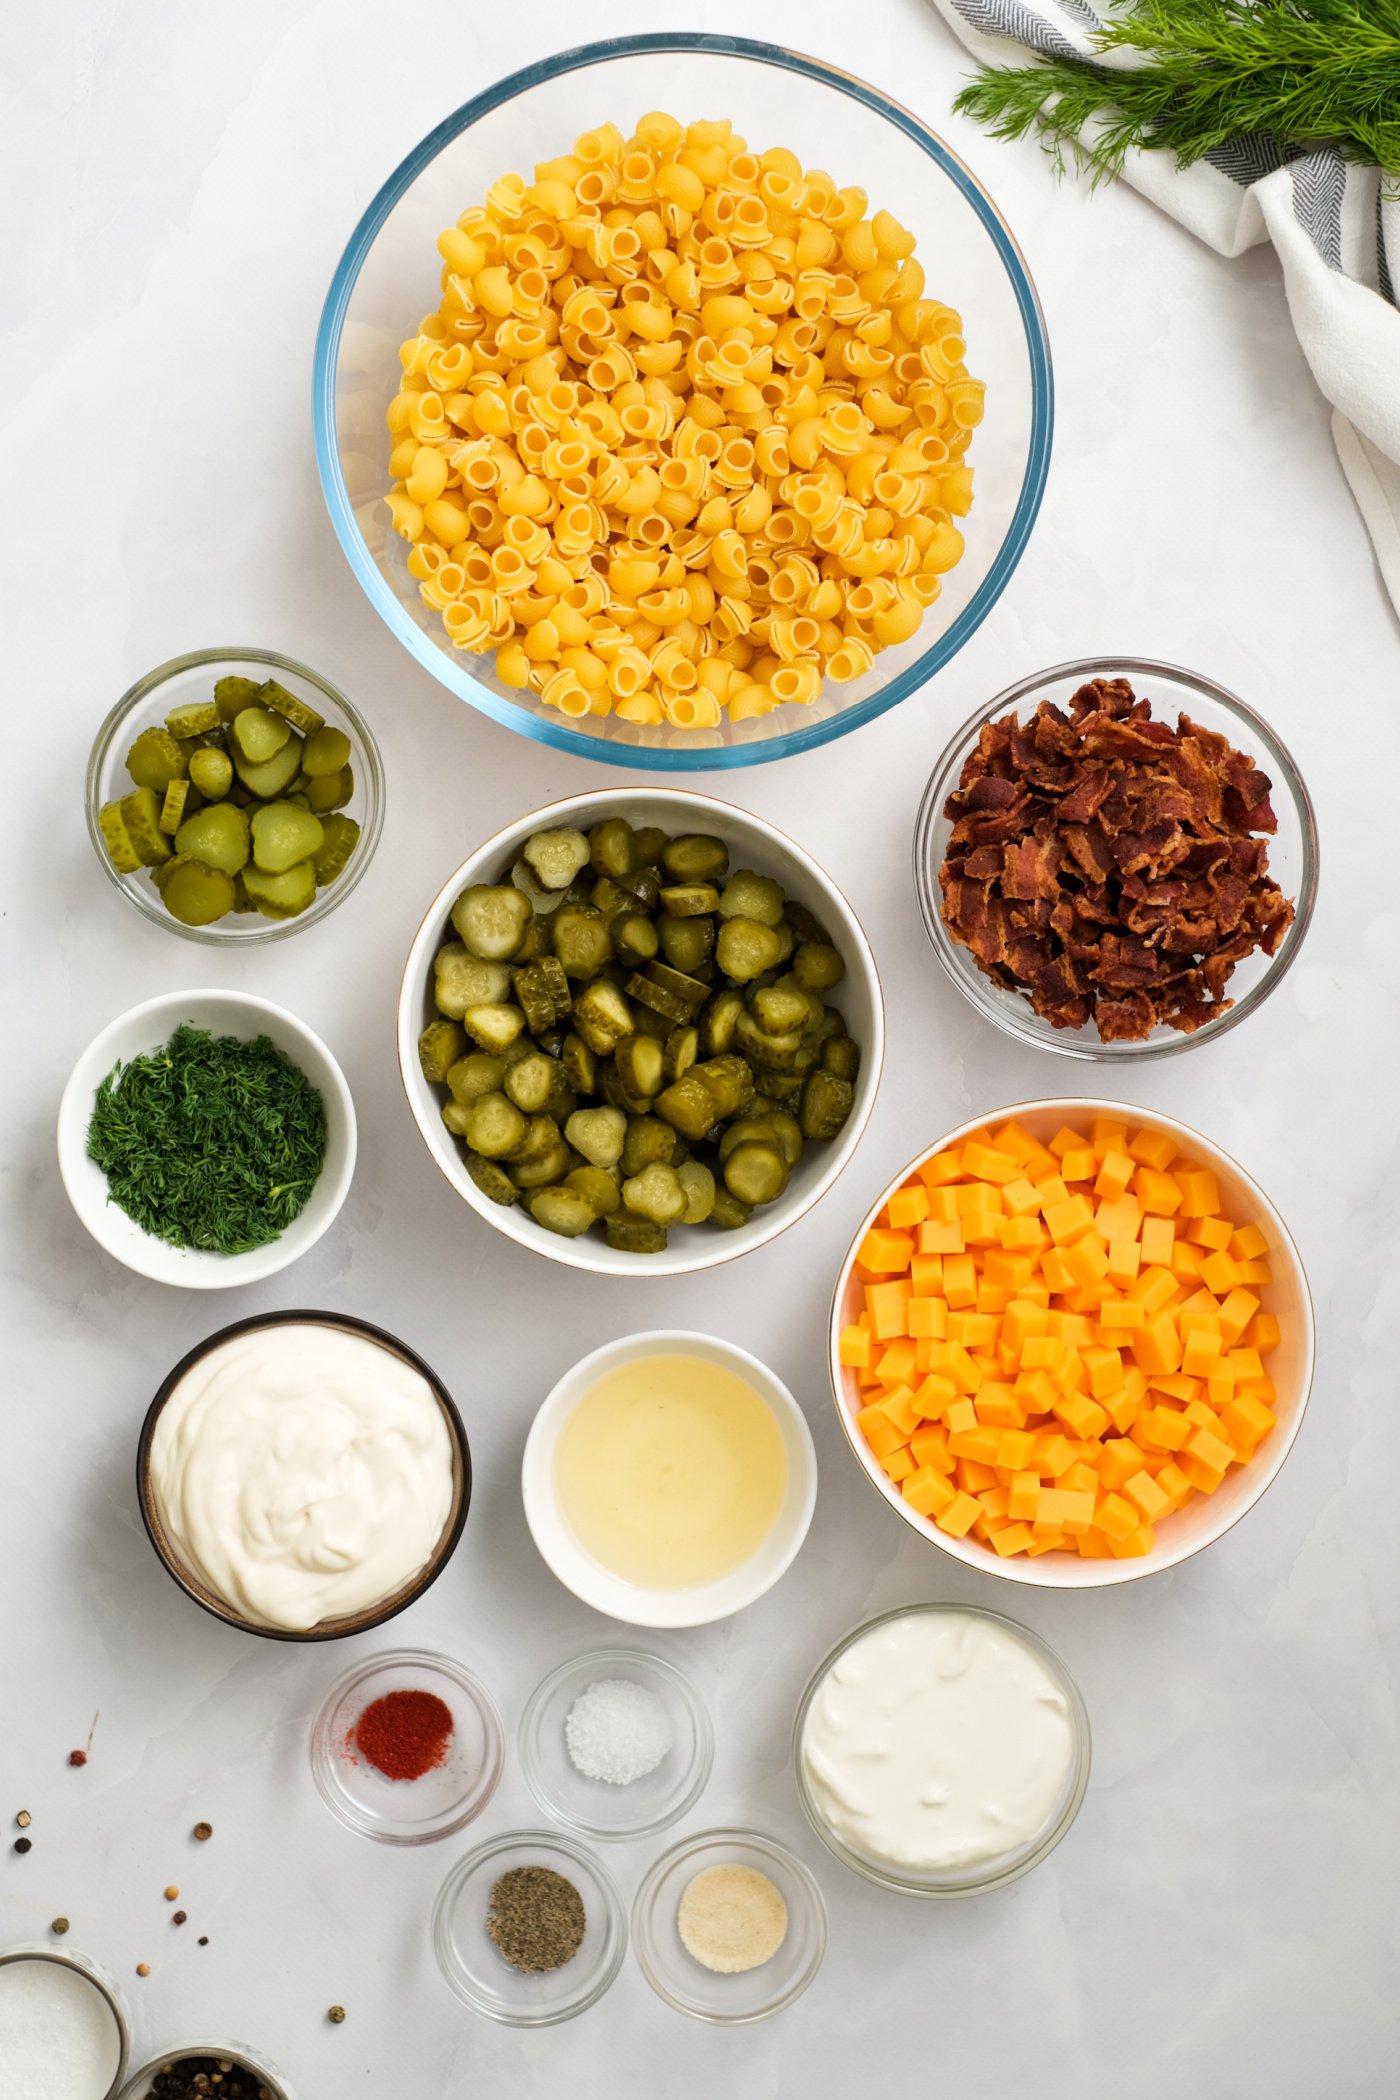 ingredients for Pasta Salad with pickles